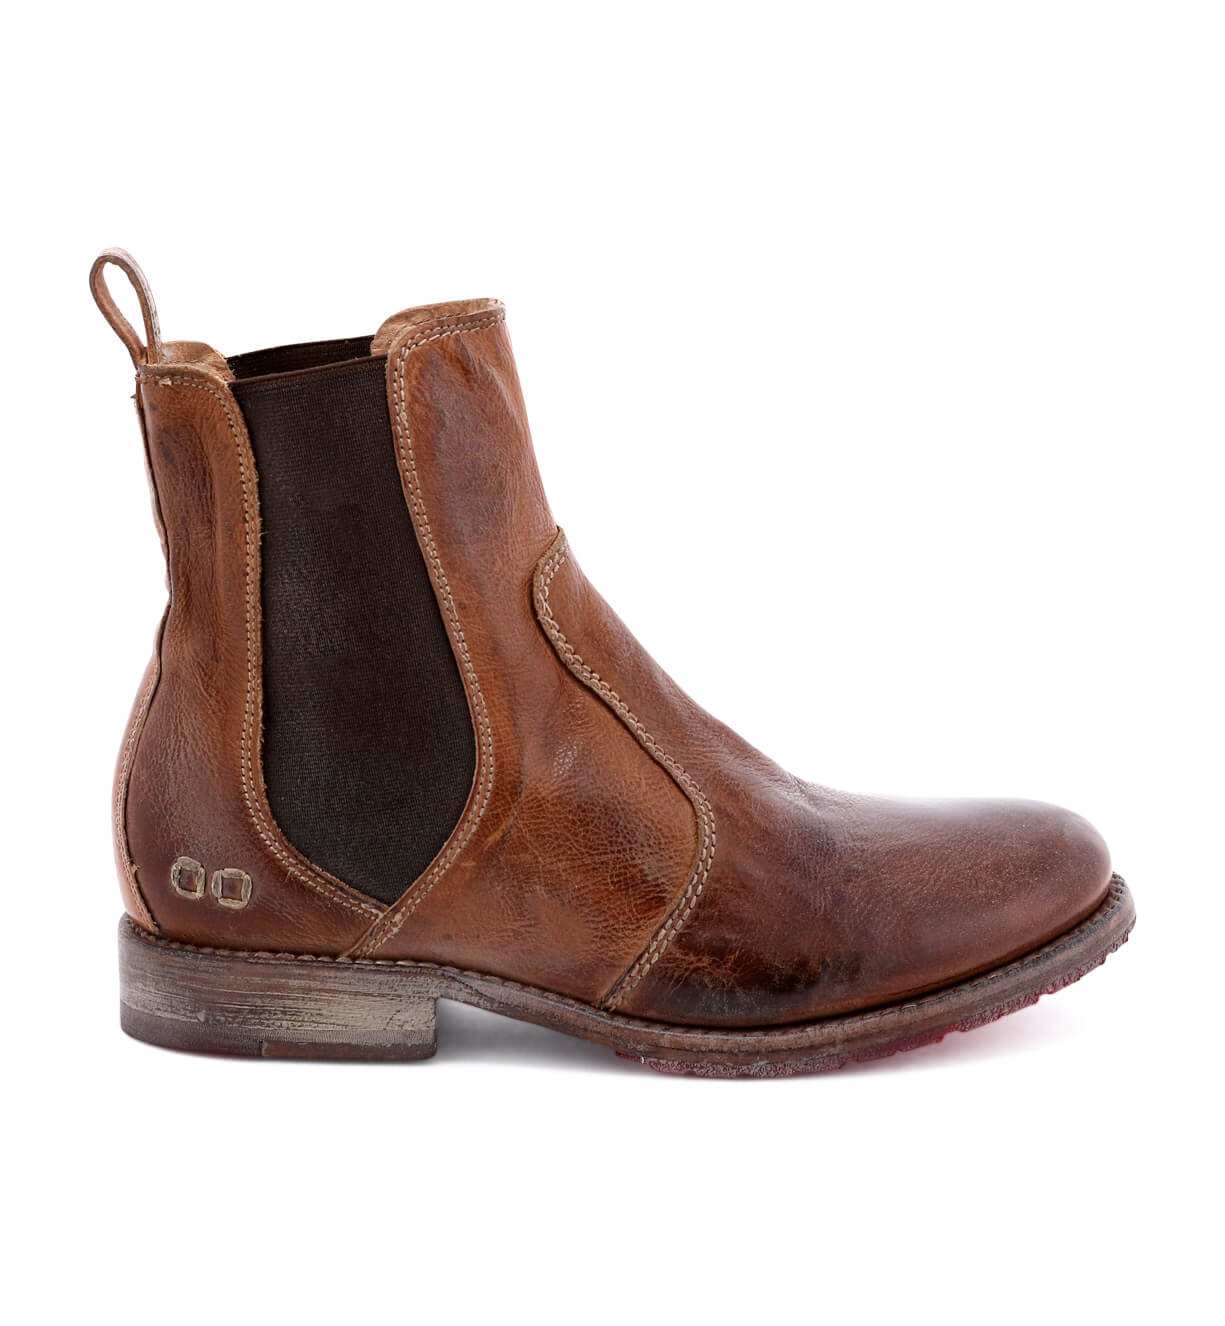 A Nandi tan pure leather chelsea boot by Bed Stu.